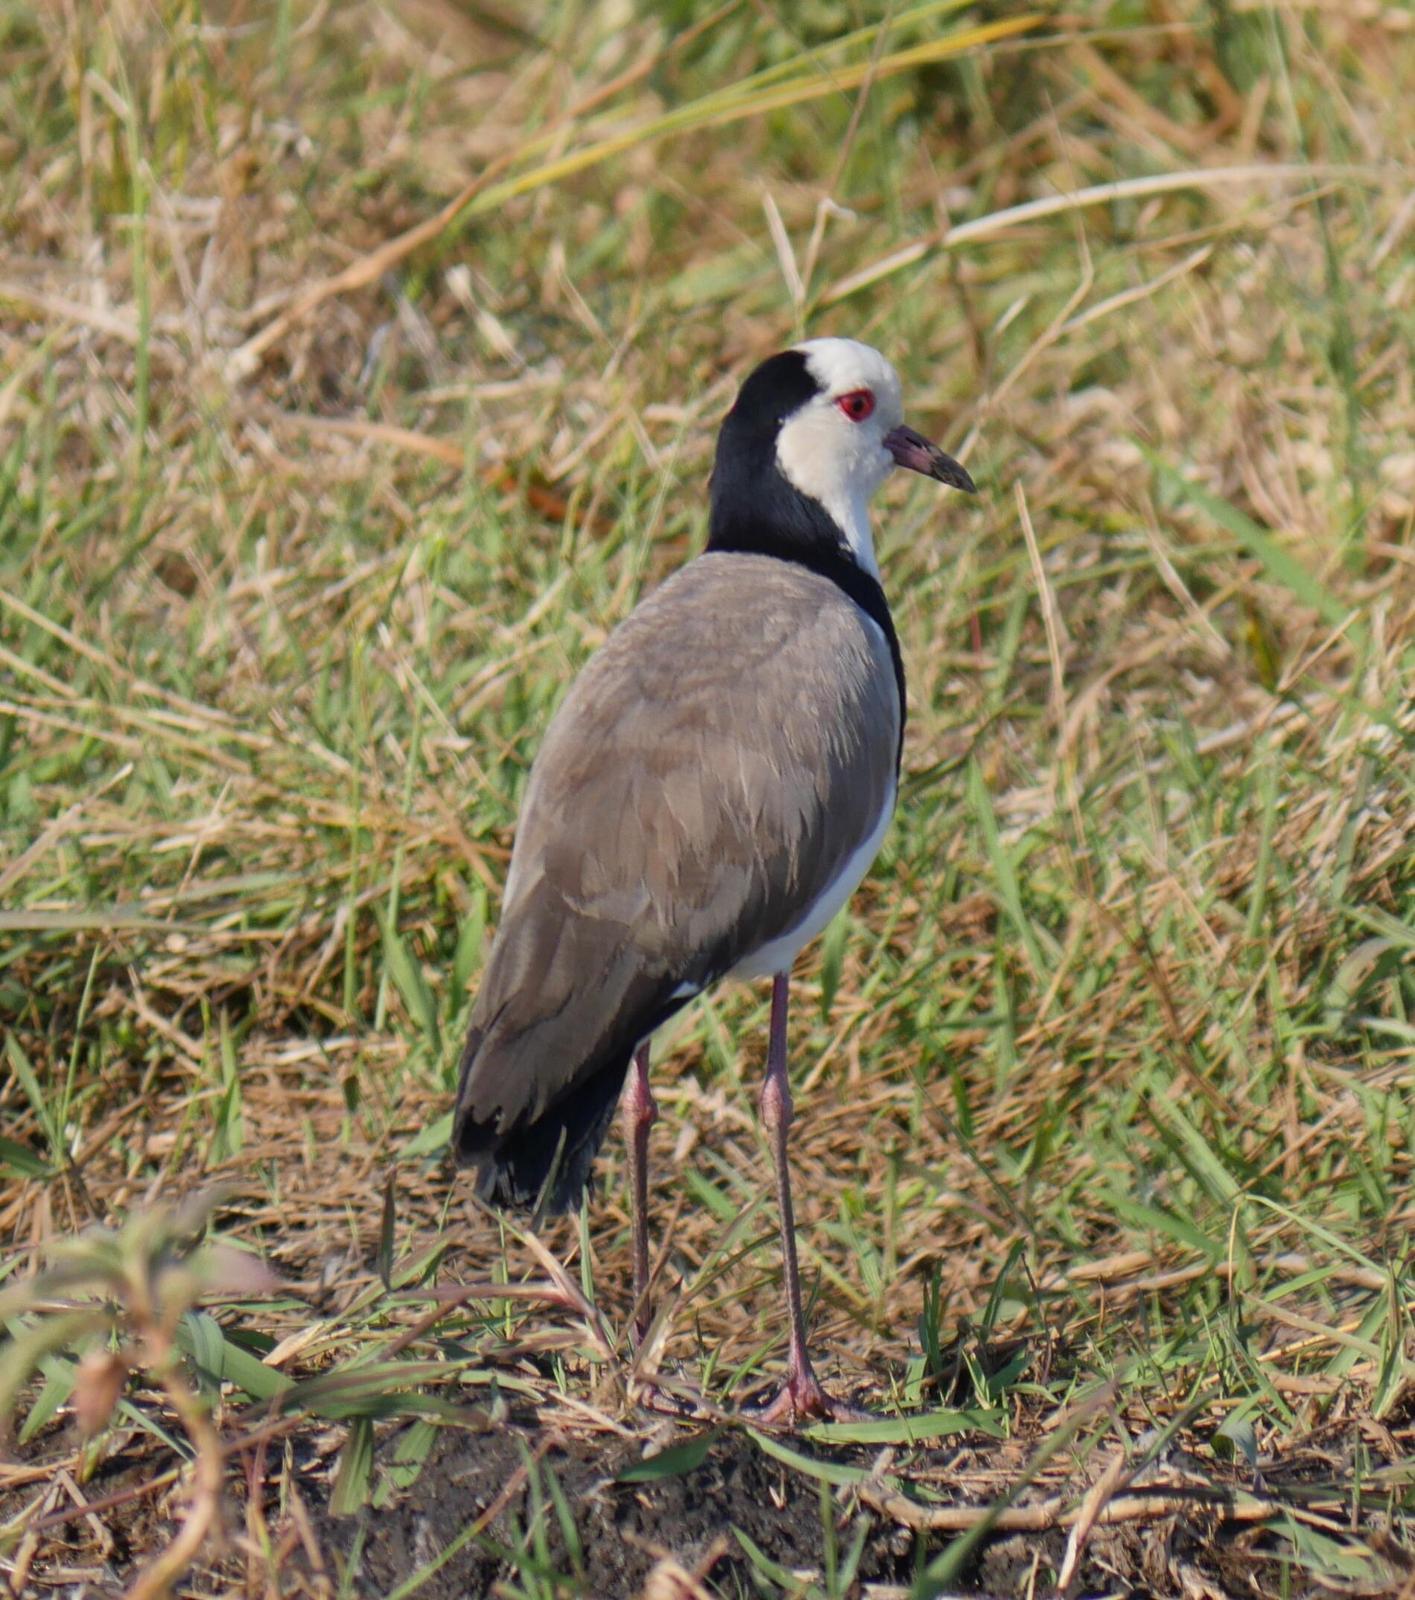 Long-toed Lapwing Photo by Peter Lowe